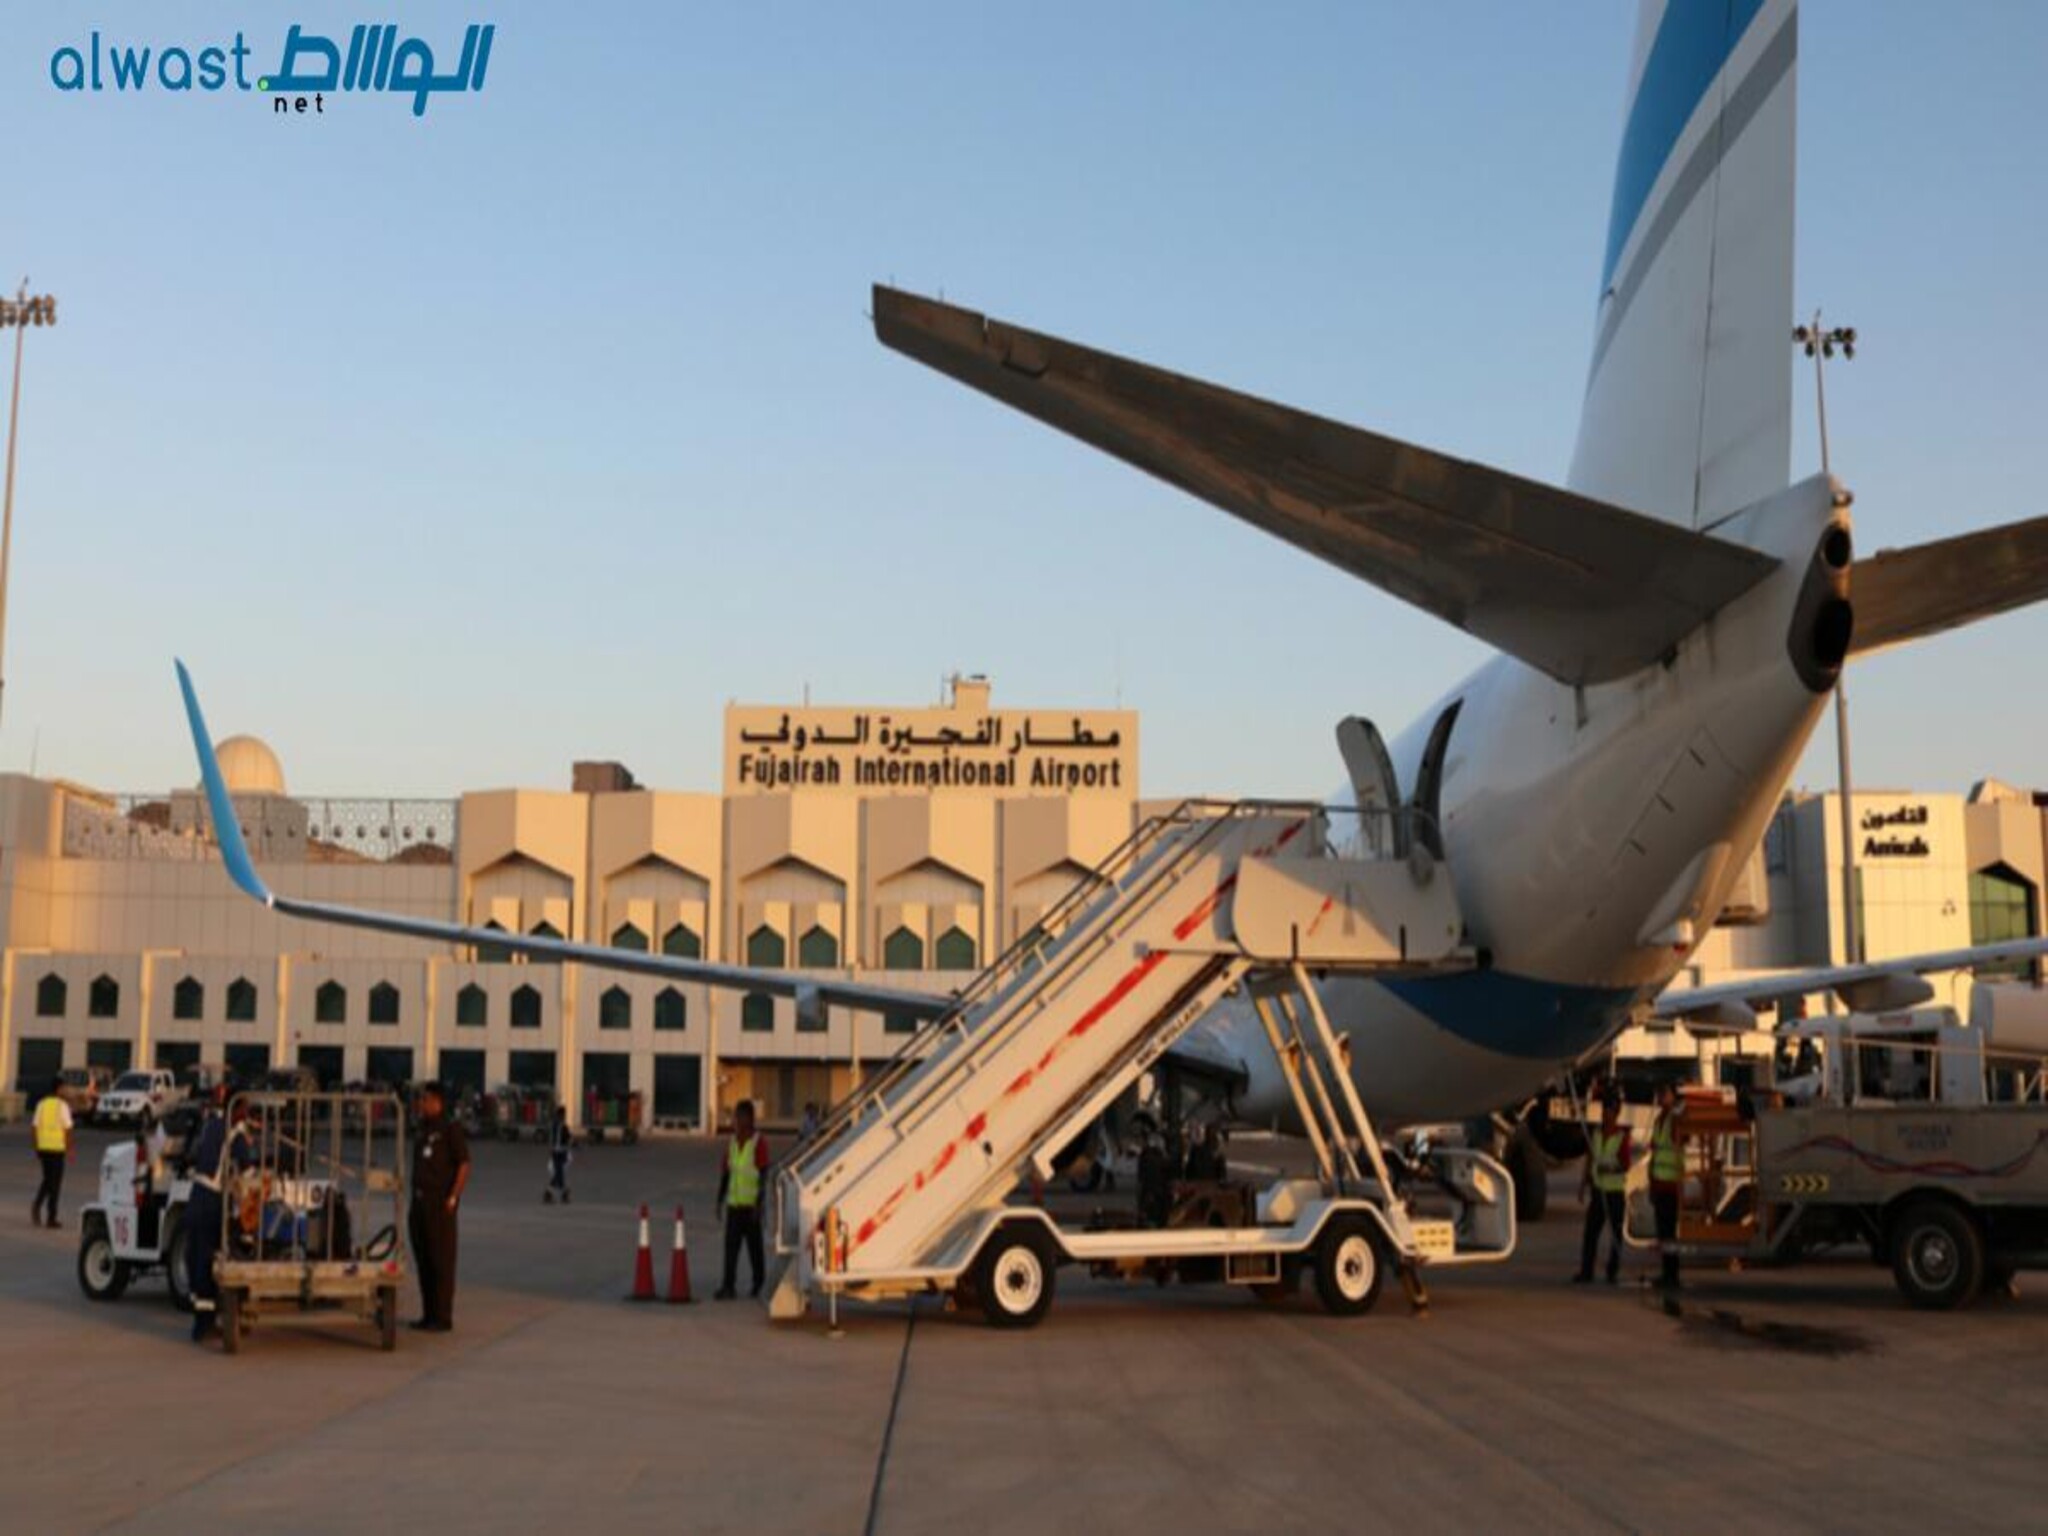 UAE travelers to benefit from swift 15-minute airport exits with Fujairah flight